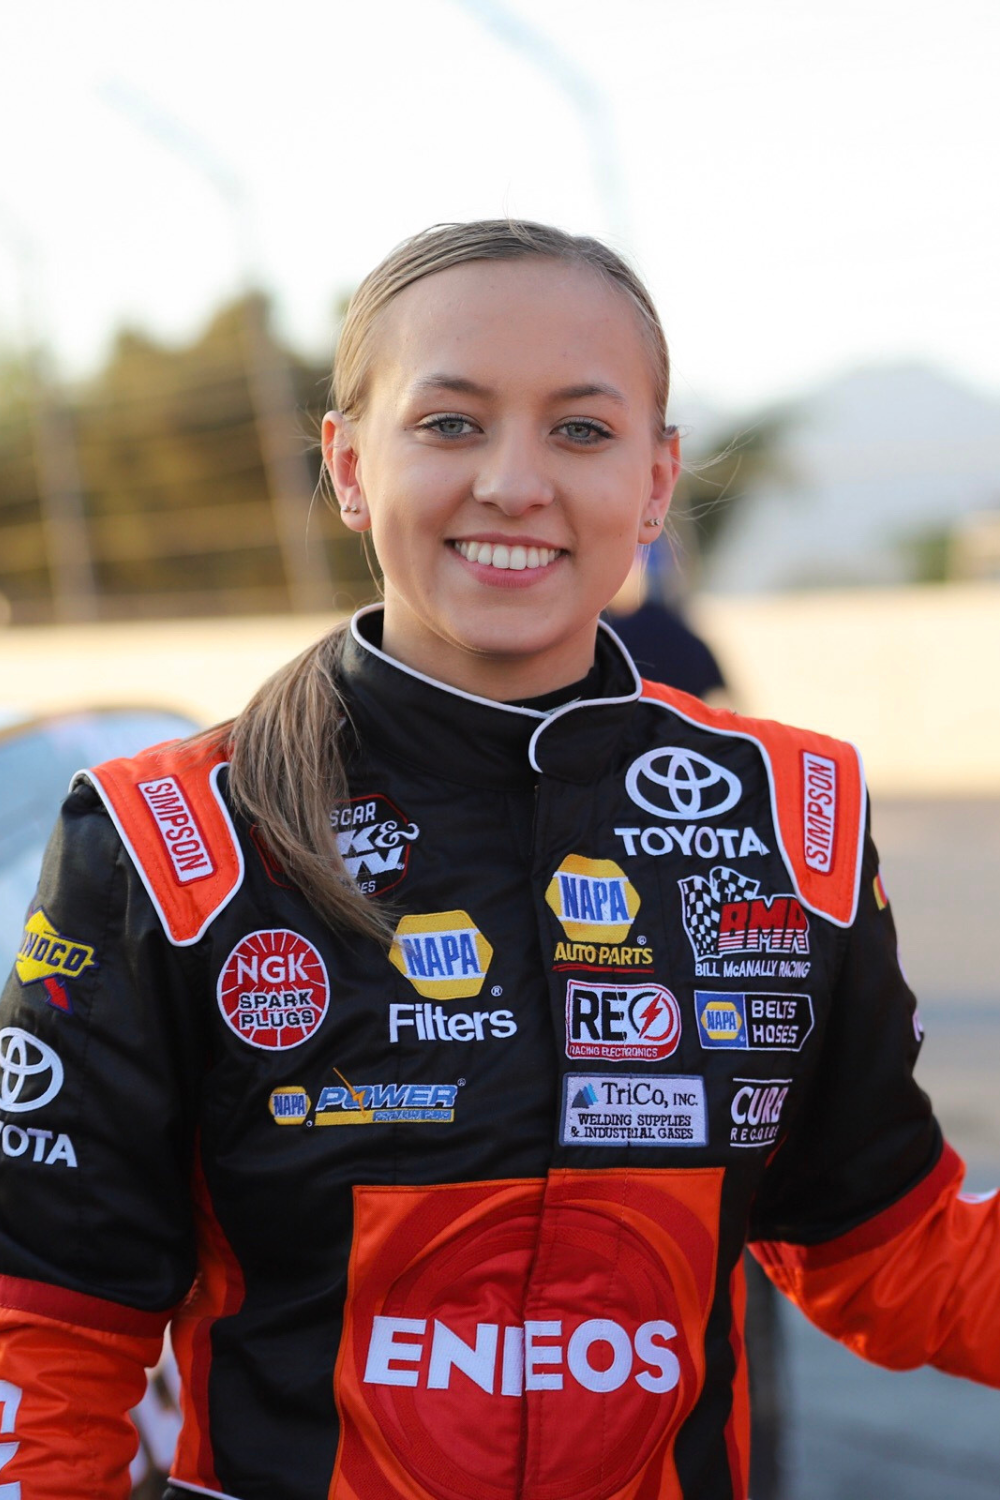 Brittney Zamora, The First Woman To Win 100-Lap Pro Late Model Feature Race